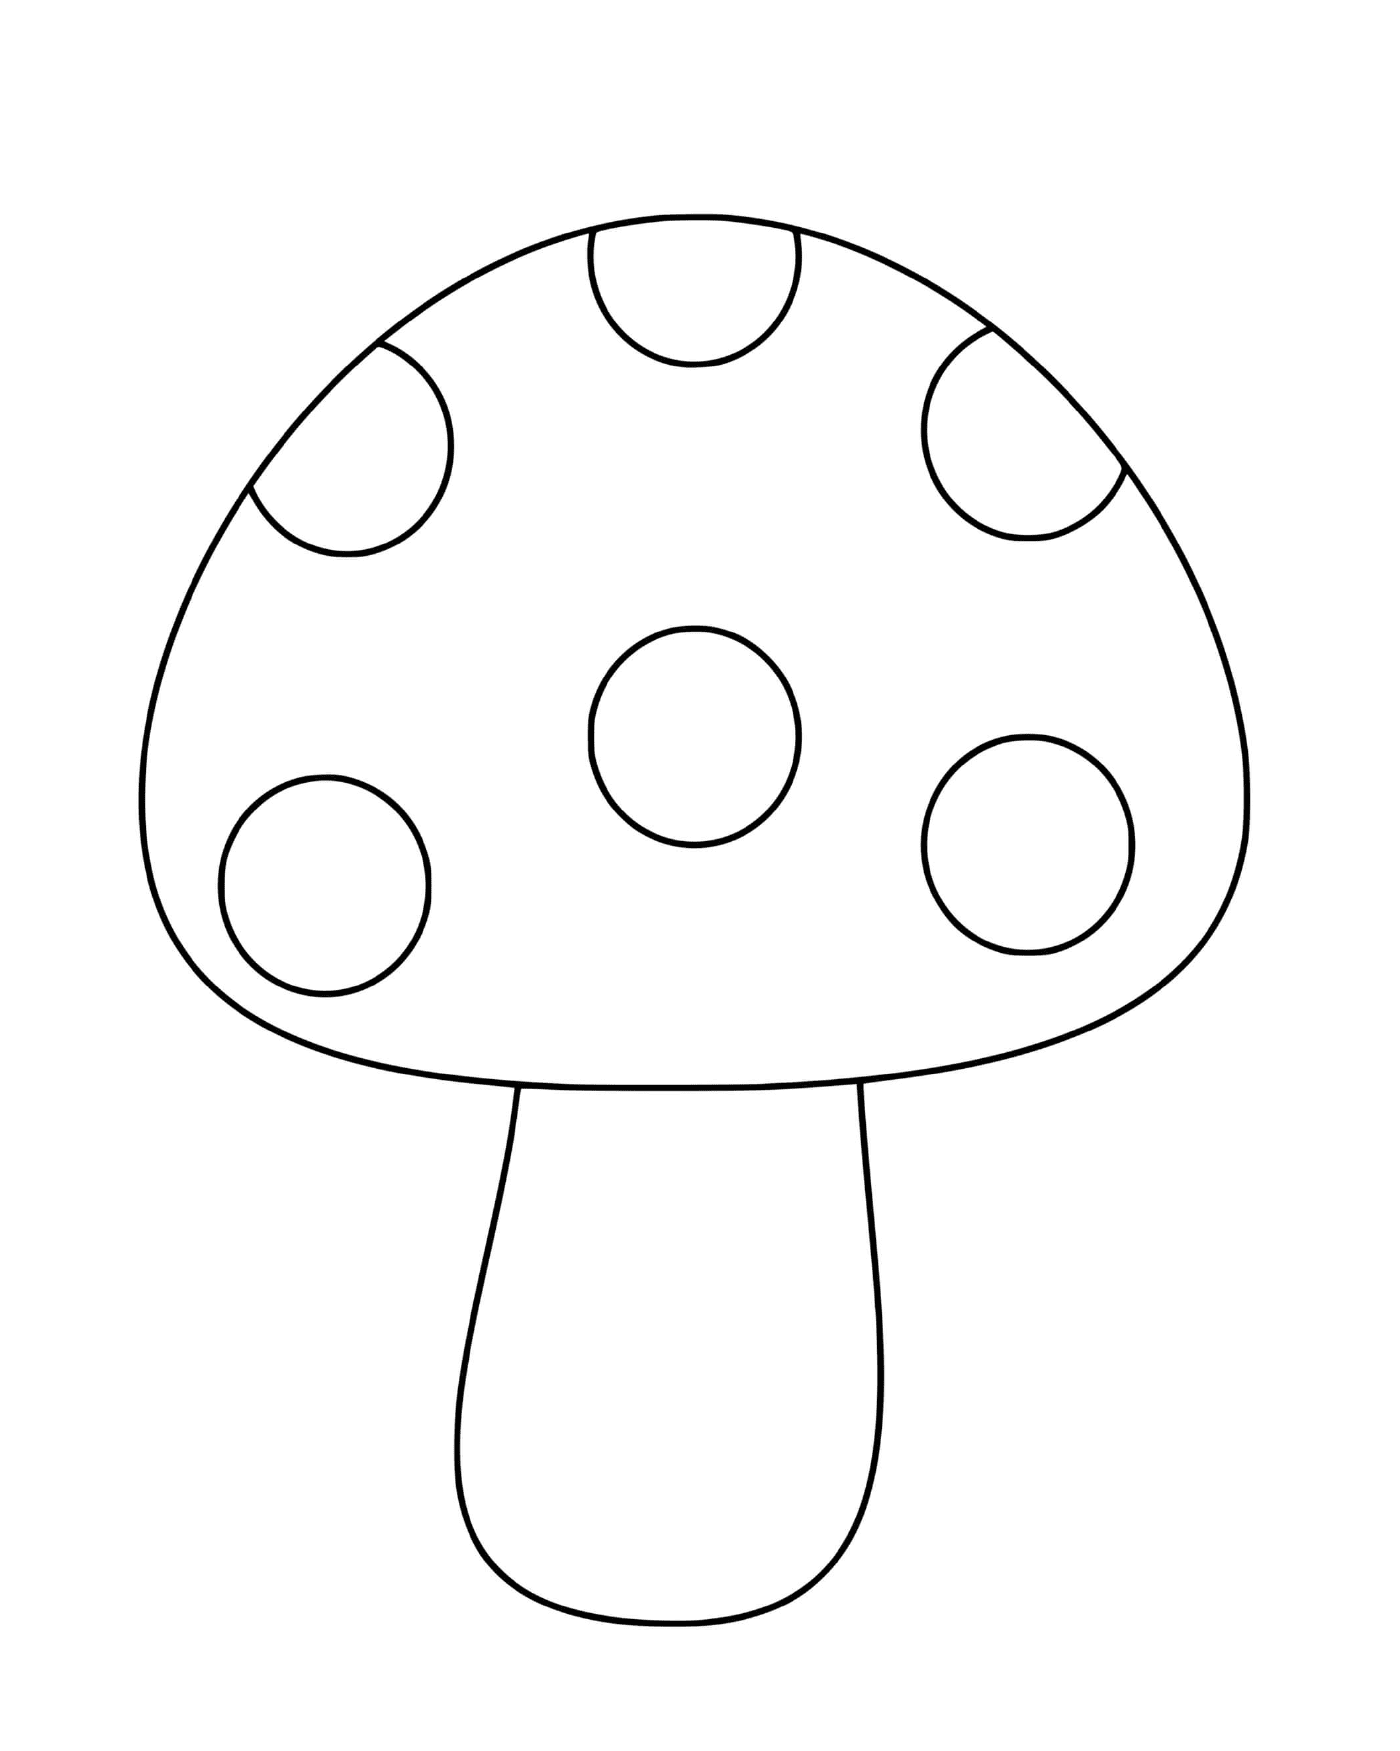  A simple mushroom with a classic appearance 